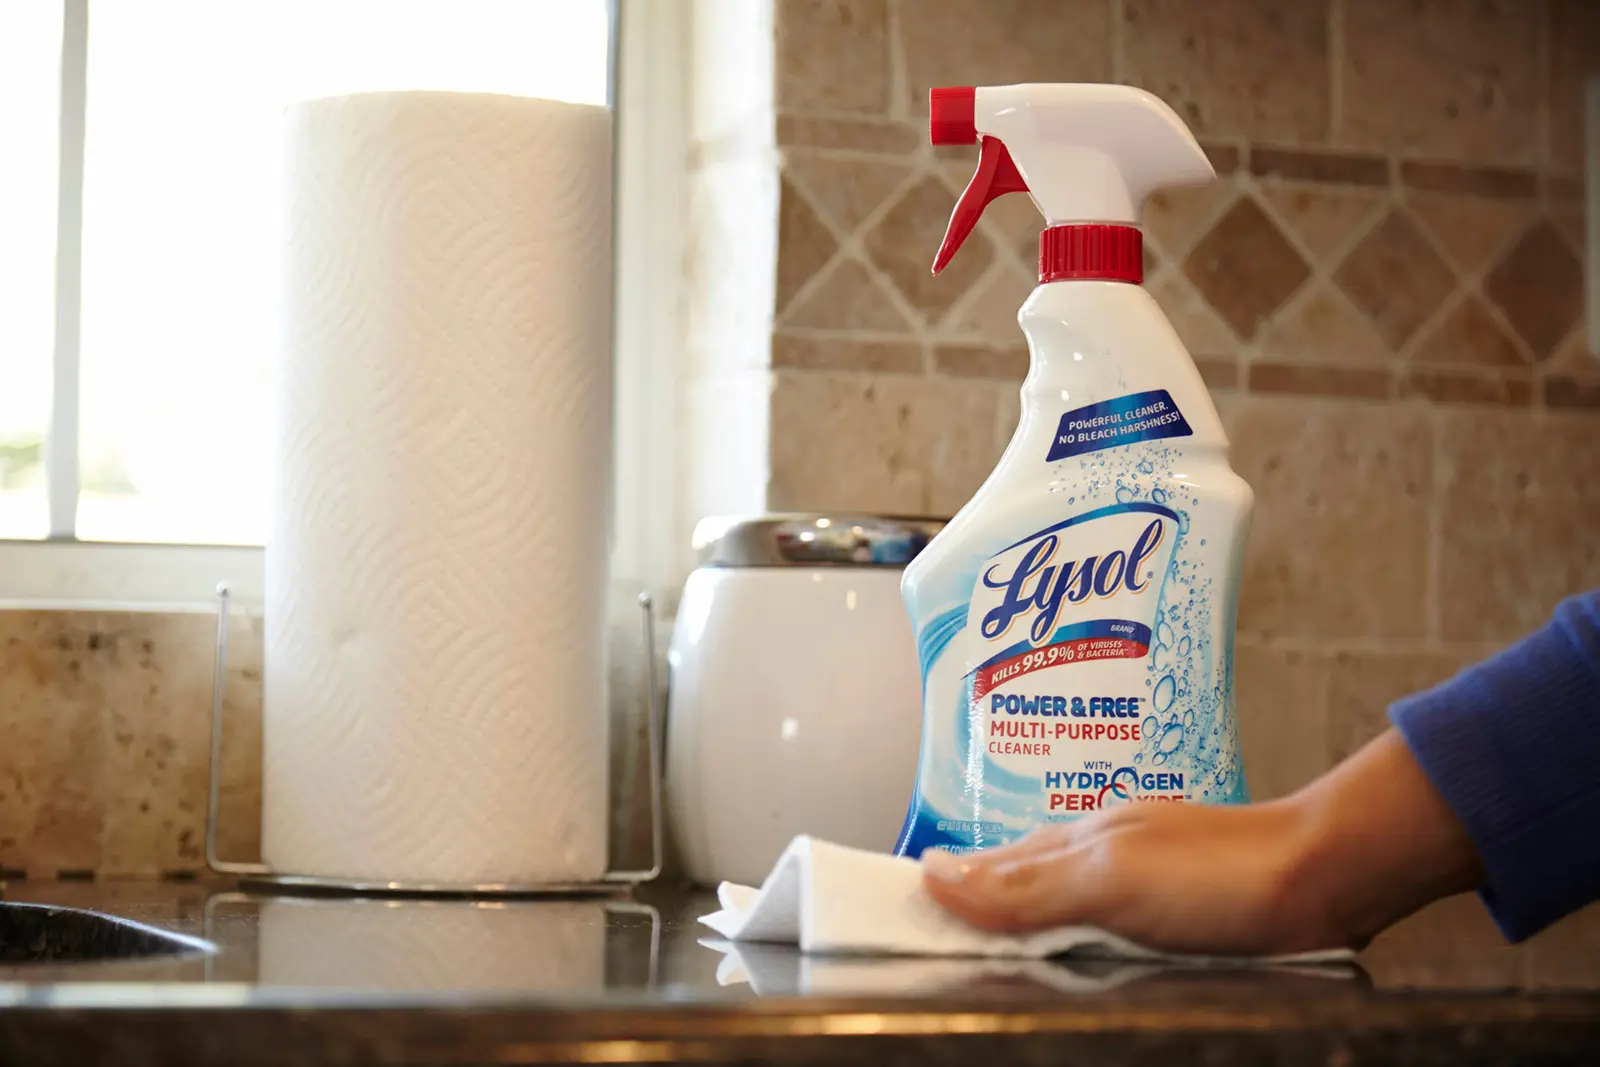 Person wiping a kitchen counter in front of a bottle of Lysol Multi Purpose Cleaner with Hydrogen Peroxide